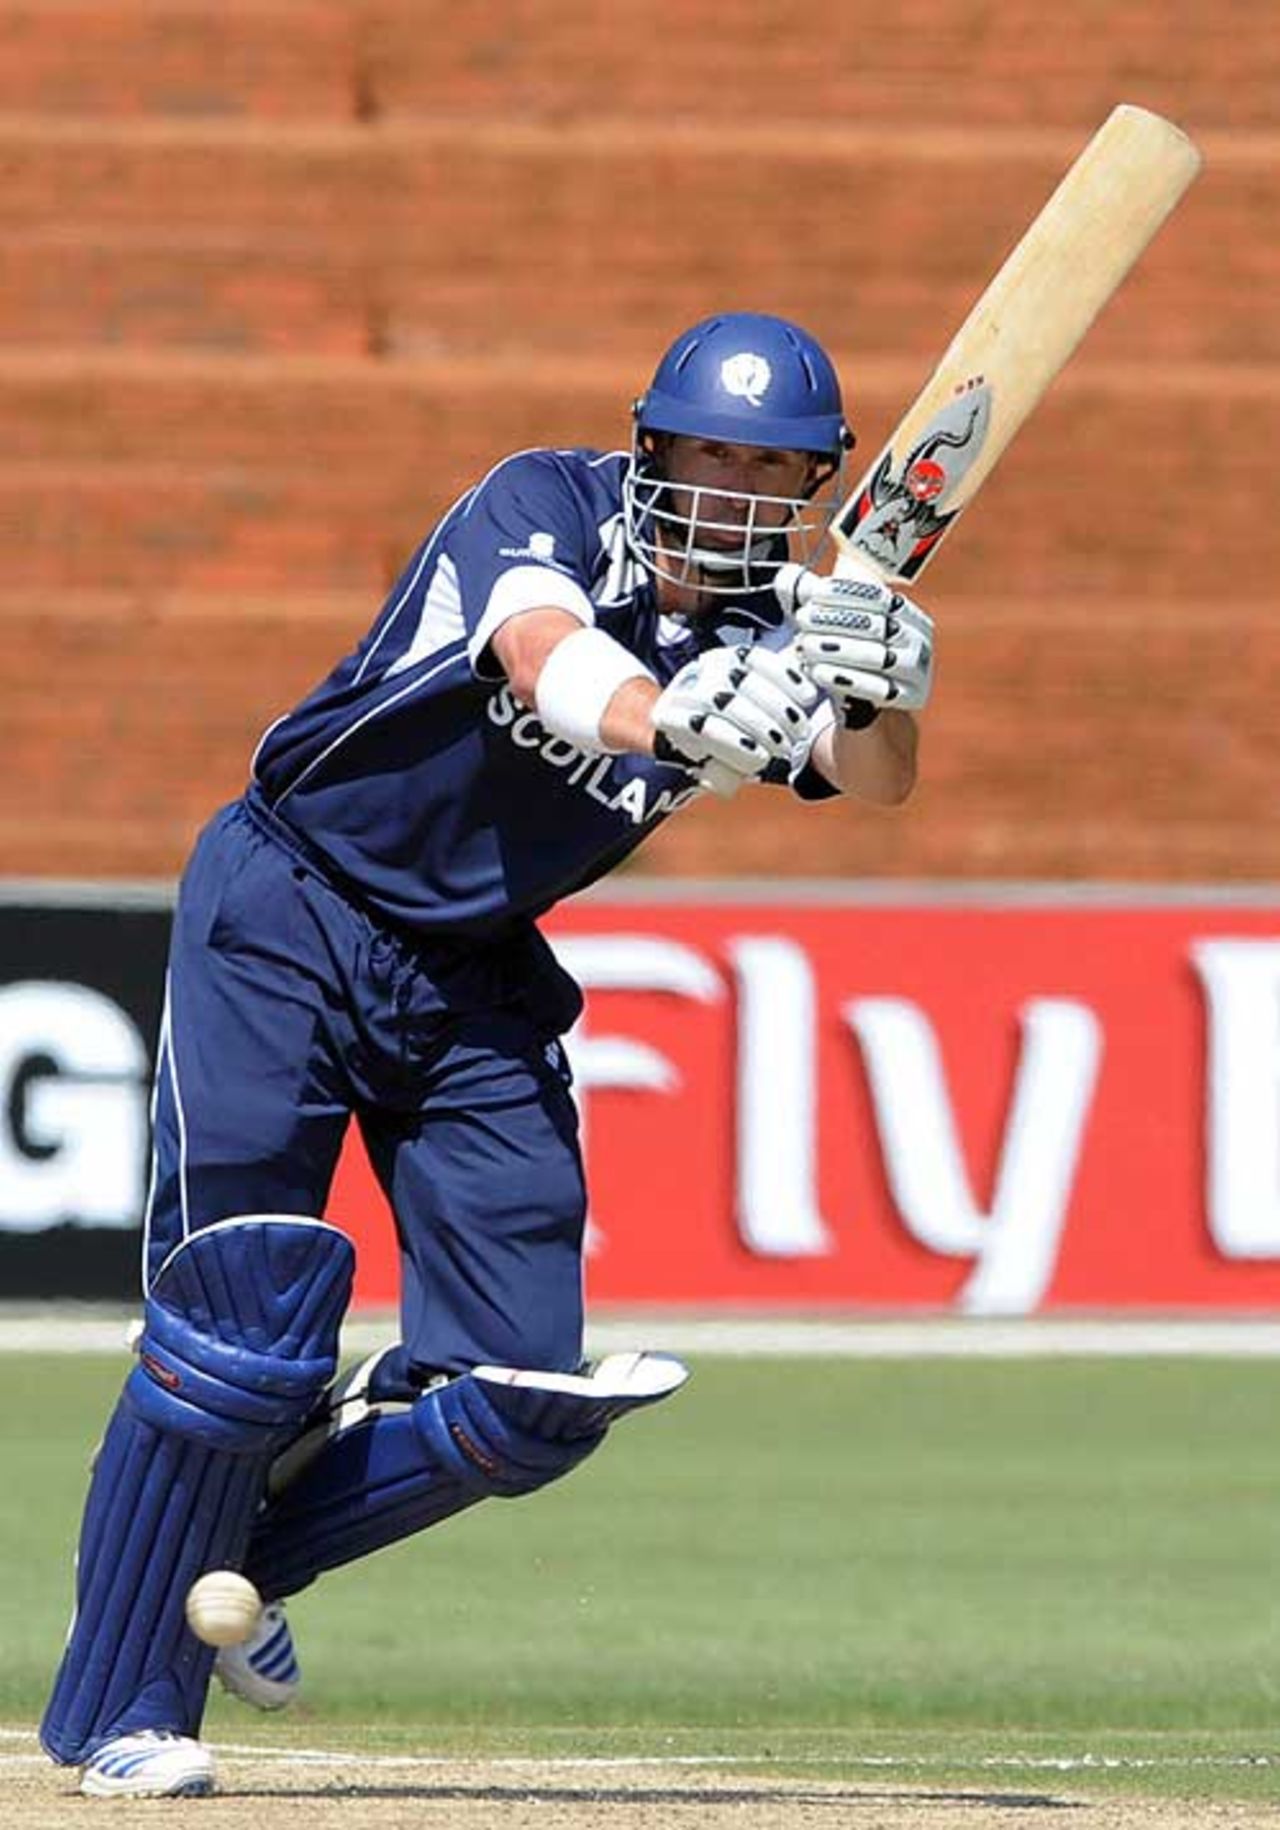 Gavin Hamilton clips during his innings of 51, Netherlands v Scotland, ICC World Cup Qualifiers, Super Eights, Johannesburg, April 11, 2009
